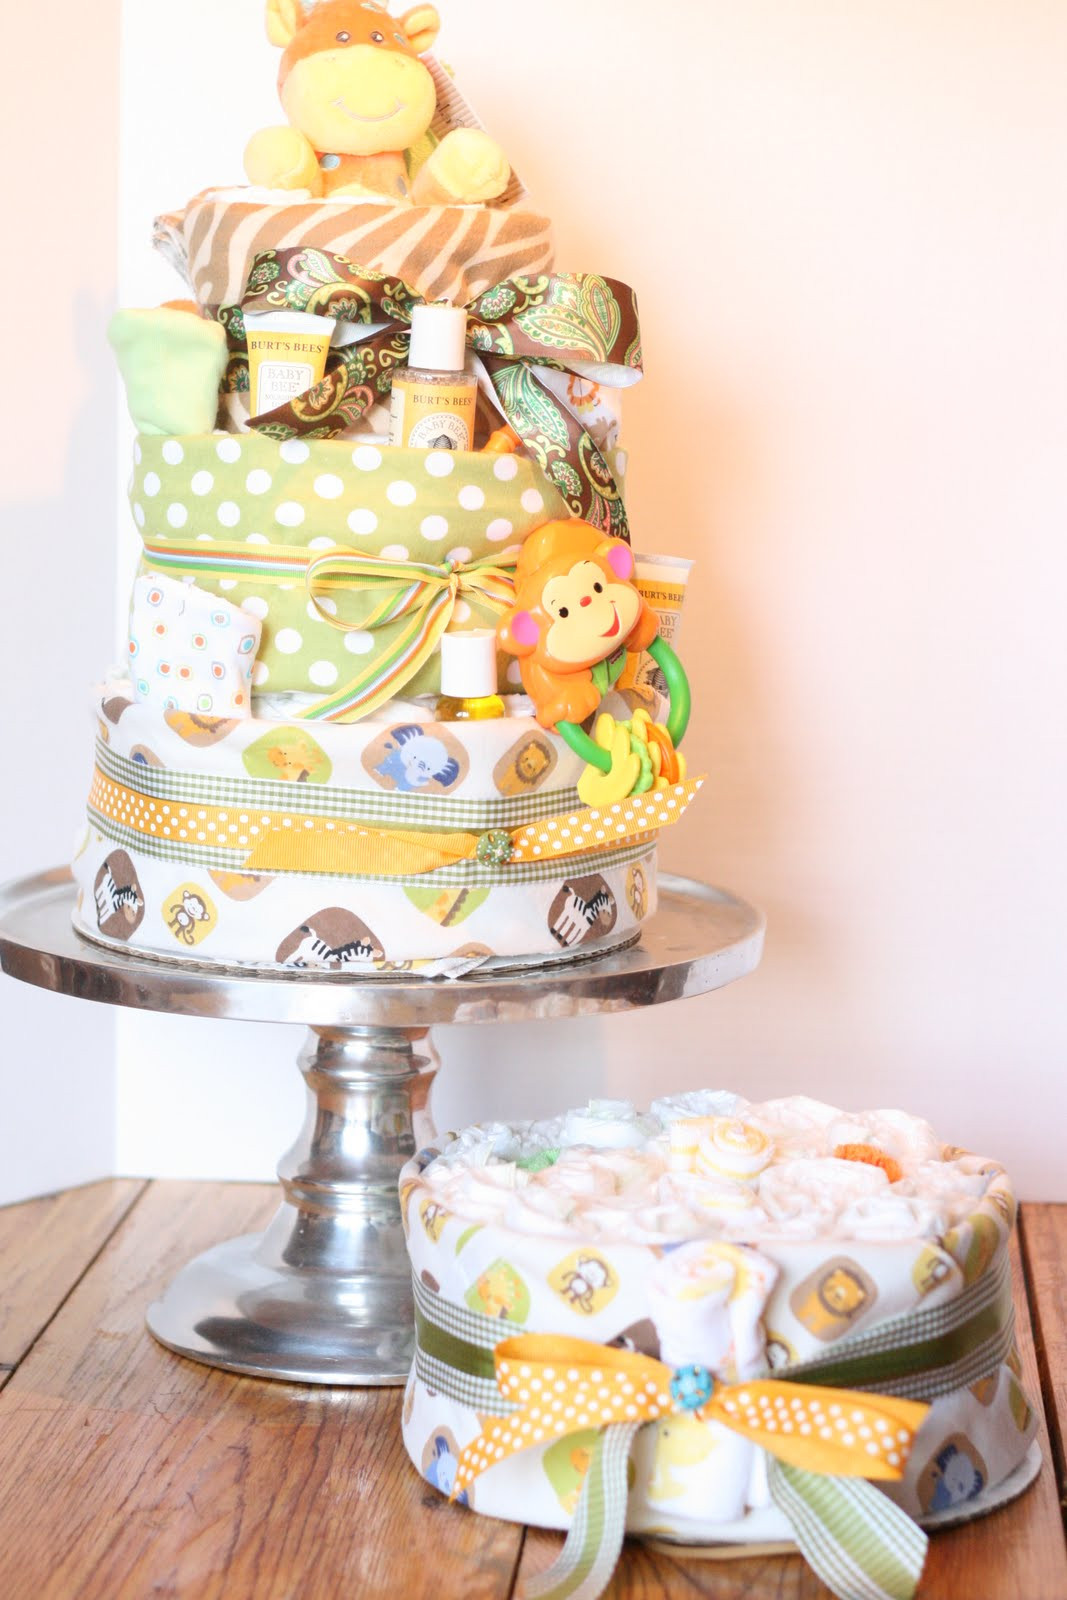 DIY Baby Gift Ideas
 25 DIY Baby Shower Gifts for the Little Boy on the Wa